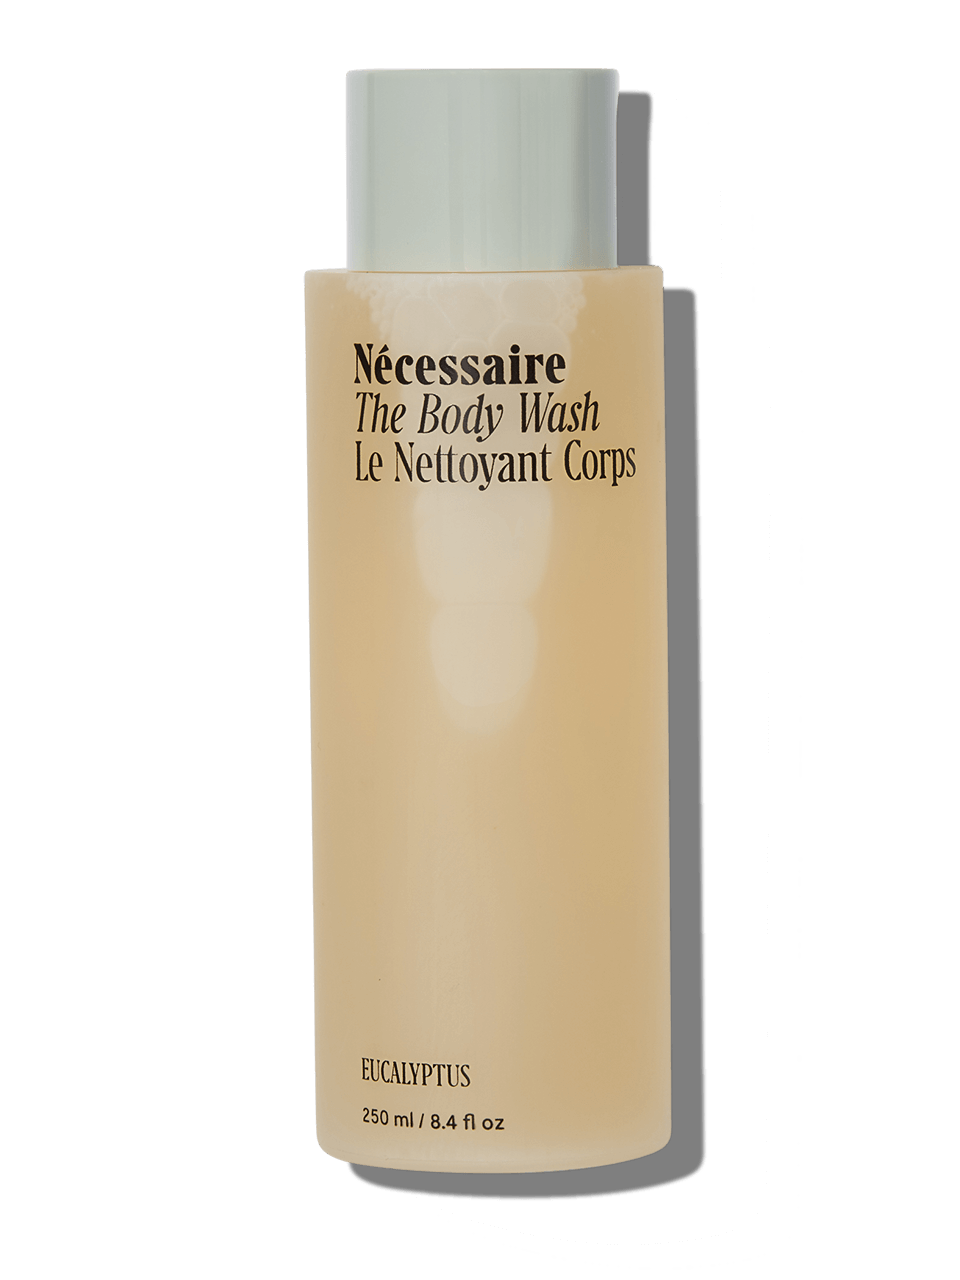 The Body Wash LIFESTYLE Necessaire 